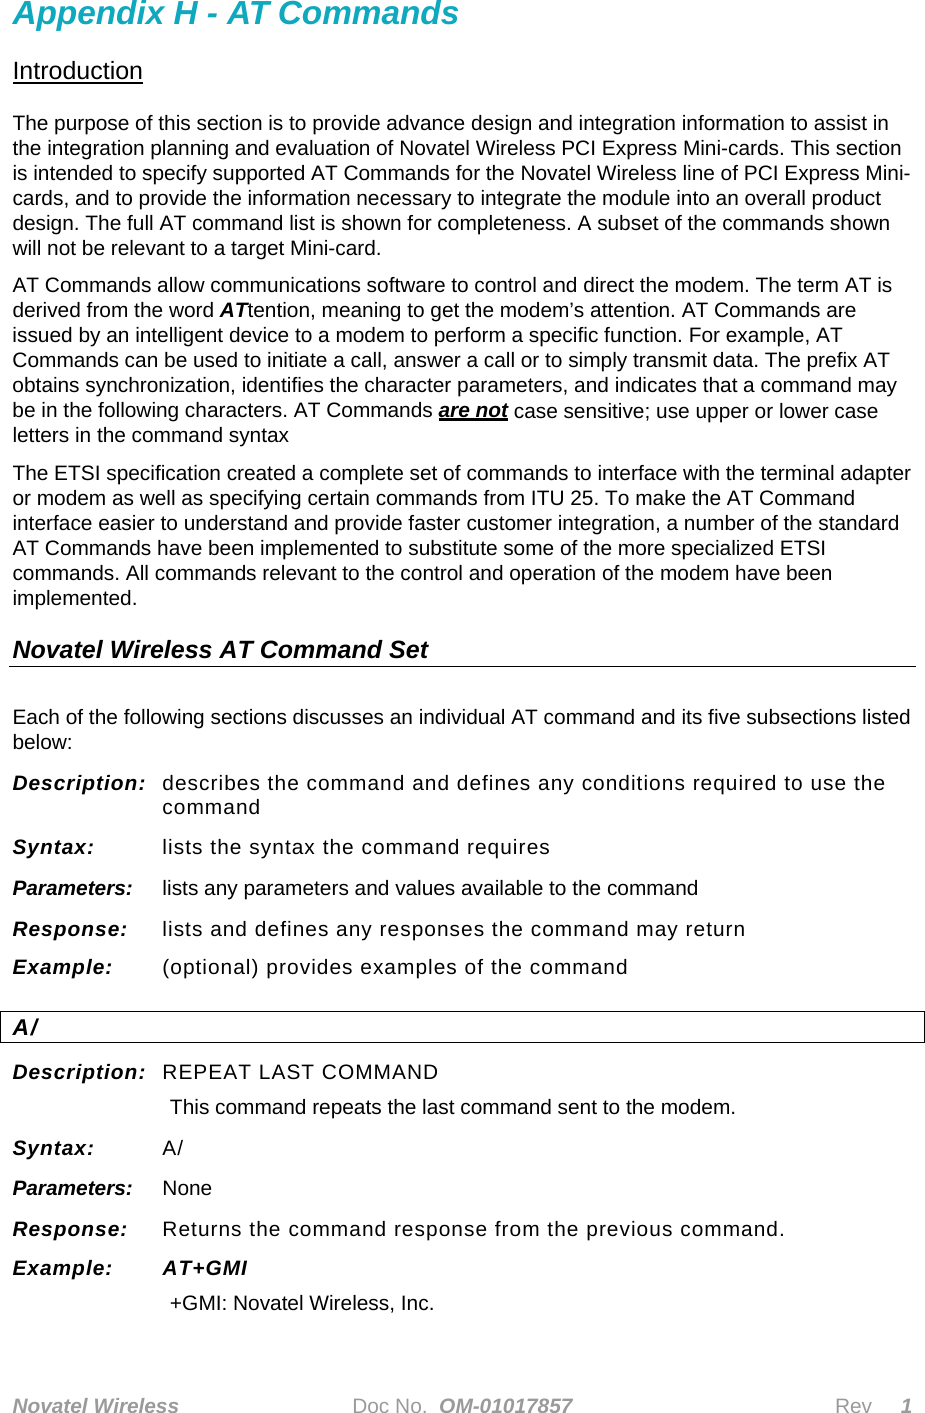  Novatel Wireless   Doc No.  OM-01017857                              Rev     1 Appendix H - AT Commands Introduction The purpose of this section is to provide advance design and integration information to assist in the integration planning and evaluation of Novatel Wireless PCI Express Mini-cards. This section is intended to specify supported AT Commands for the Novatel Wireless line of PCI Express Mini-cards, and to provide the information necessary to integrate the module into an overall product design. The full AT command list is shown for completeness. A subset of the commands shown  will not be relevant to a target Mini-card.  AT Commands allow communications software to control and direct the modem. The term AT is derived from the word ATtention, meaning to get the modem’s attention. AT Commands are issued by an intelligent device to a modem to perform a specific function. For example, AT Commands can be used to initiate a call, answer a call or to simply transmit data. The prefix AT obtains synchronization, identifies the character parameters, and indicates that a command may be in the following characters. AT Commands are not case sensitive; use upper or lower case letters in the command syntax The ETSI specification created a complete set of commands to interface with the terminal adapter or modem as well as specifying certain commands from ITU 25. To make the AT Command interface easier to understand and provide faster customer integration, a number of the standard AT Commands have been implemented to substitute some of the more specialized ETSI commands. All commands relevant to the control and operation of the modem have been implemented.  Novatel Wireless AT Command Set Each of the following sections discusses an individual AT command and its five subsections listed below: Description:  describes the command and defines any conditions required to use the command Syntax:  lists the syntax the command requires Parameters:  lists any parameters and values available to the command Response:  lists and defines any responses the command may return Example:  (optional) provides examples of the command A/ Description:  REPEAT LAST COMMAND  This command repeats the last command sent to the modem. Syntax:  A/ Parameters:  None Response:  Returns the command response from the previous command. Example: AT+GMI +GMI: Novatel Wireless, Inc. 